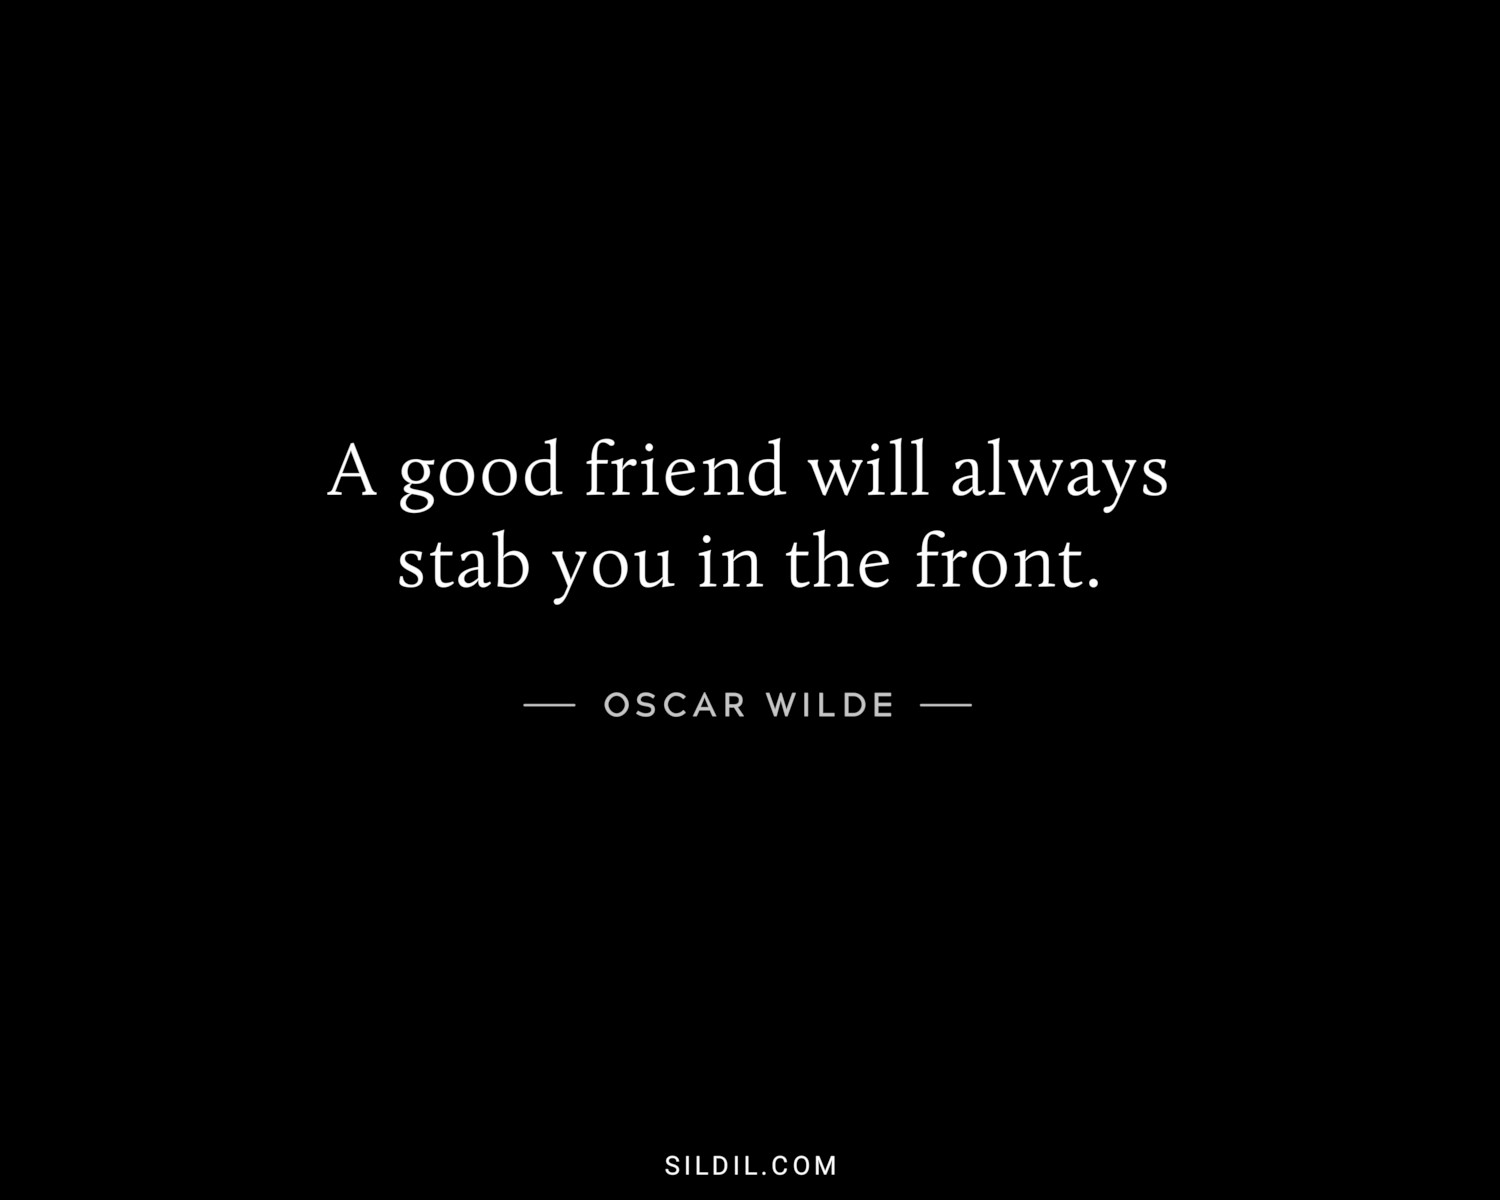 A good friend will always stab you in the front.